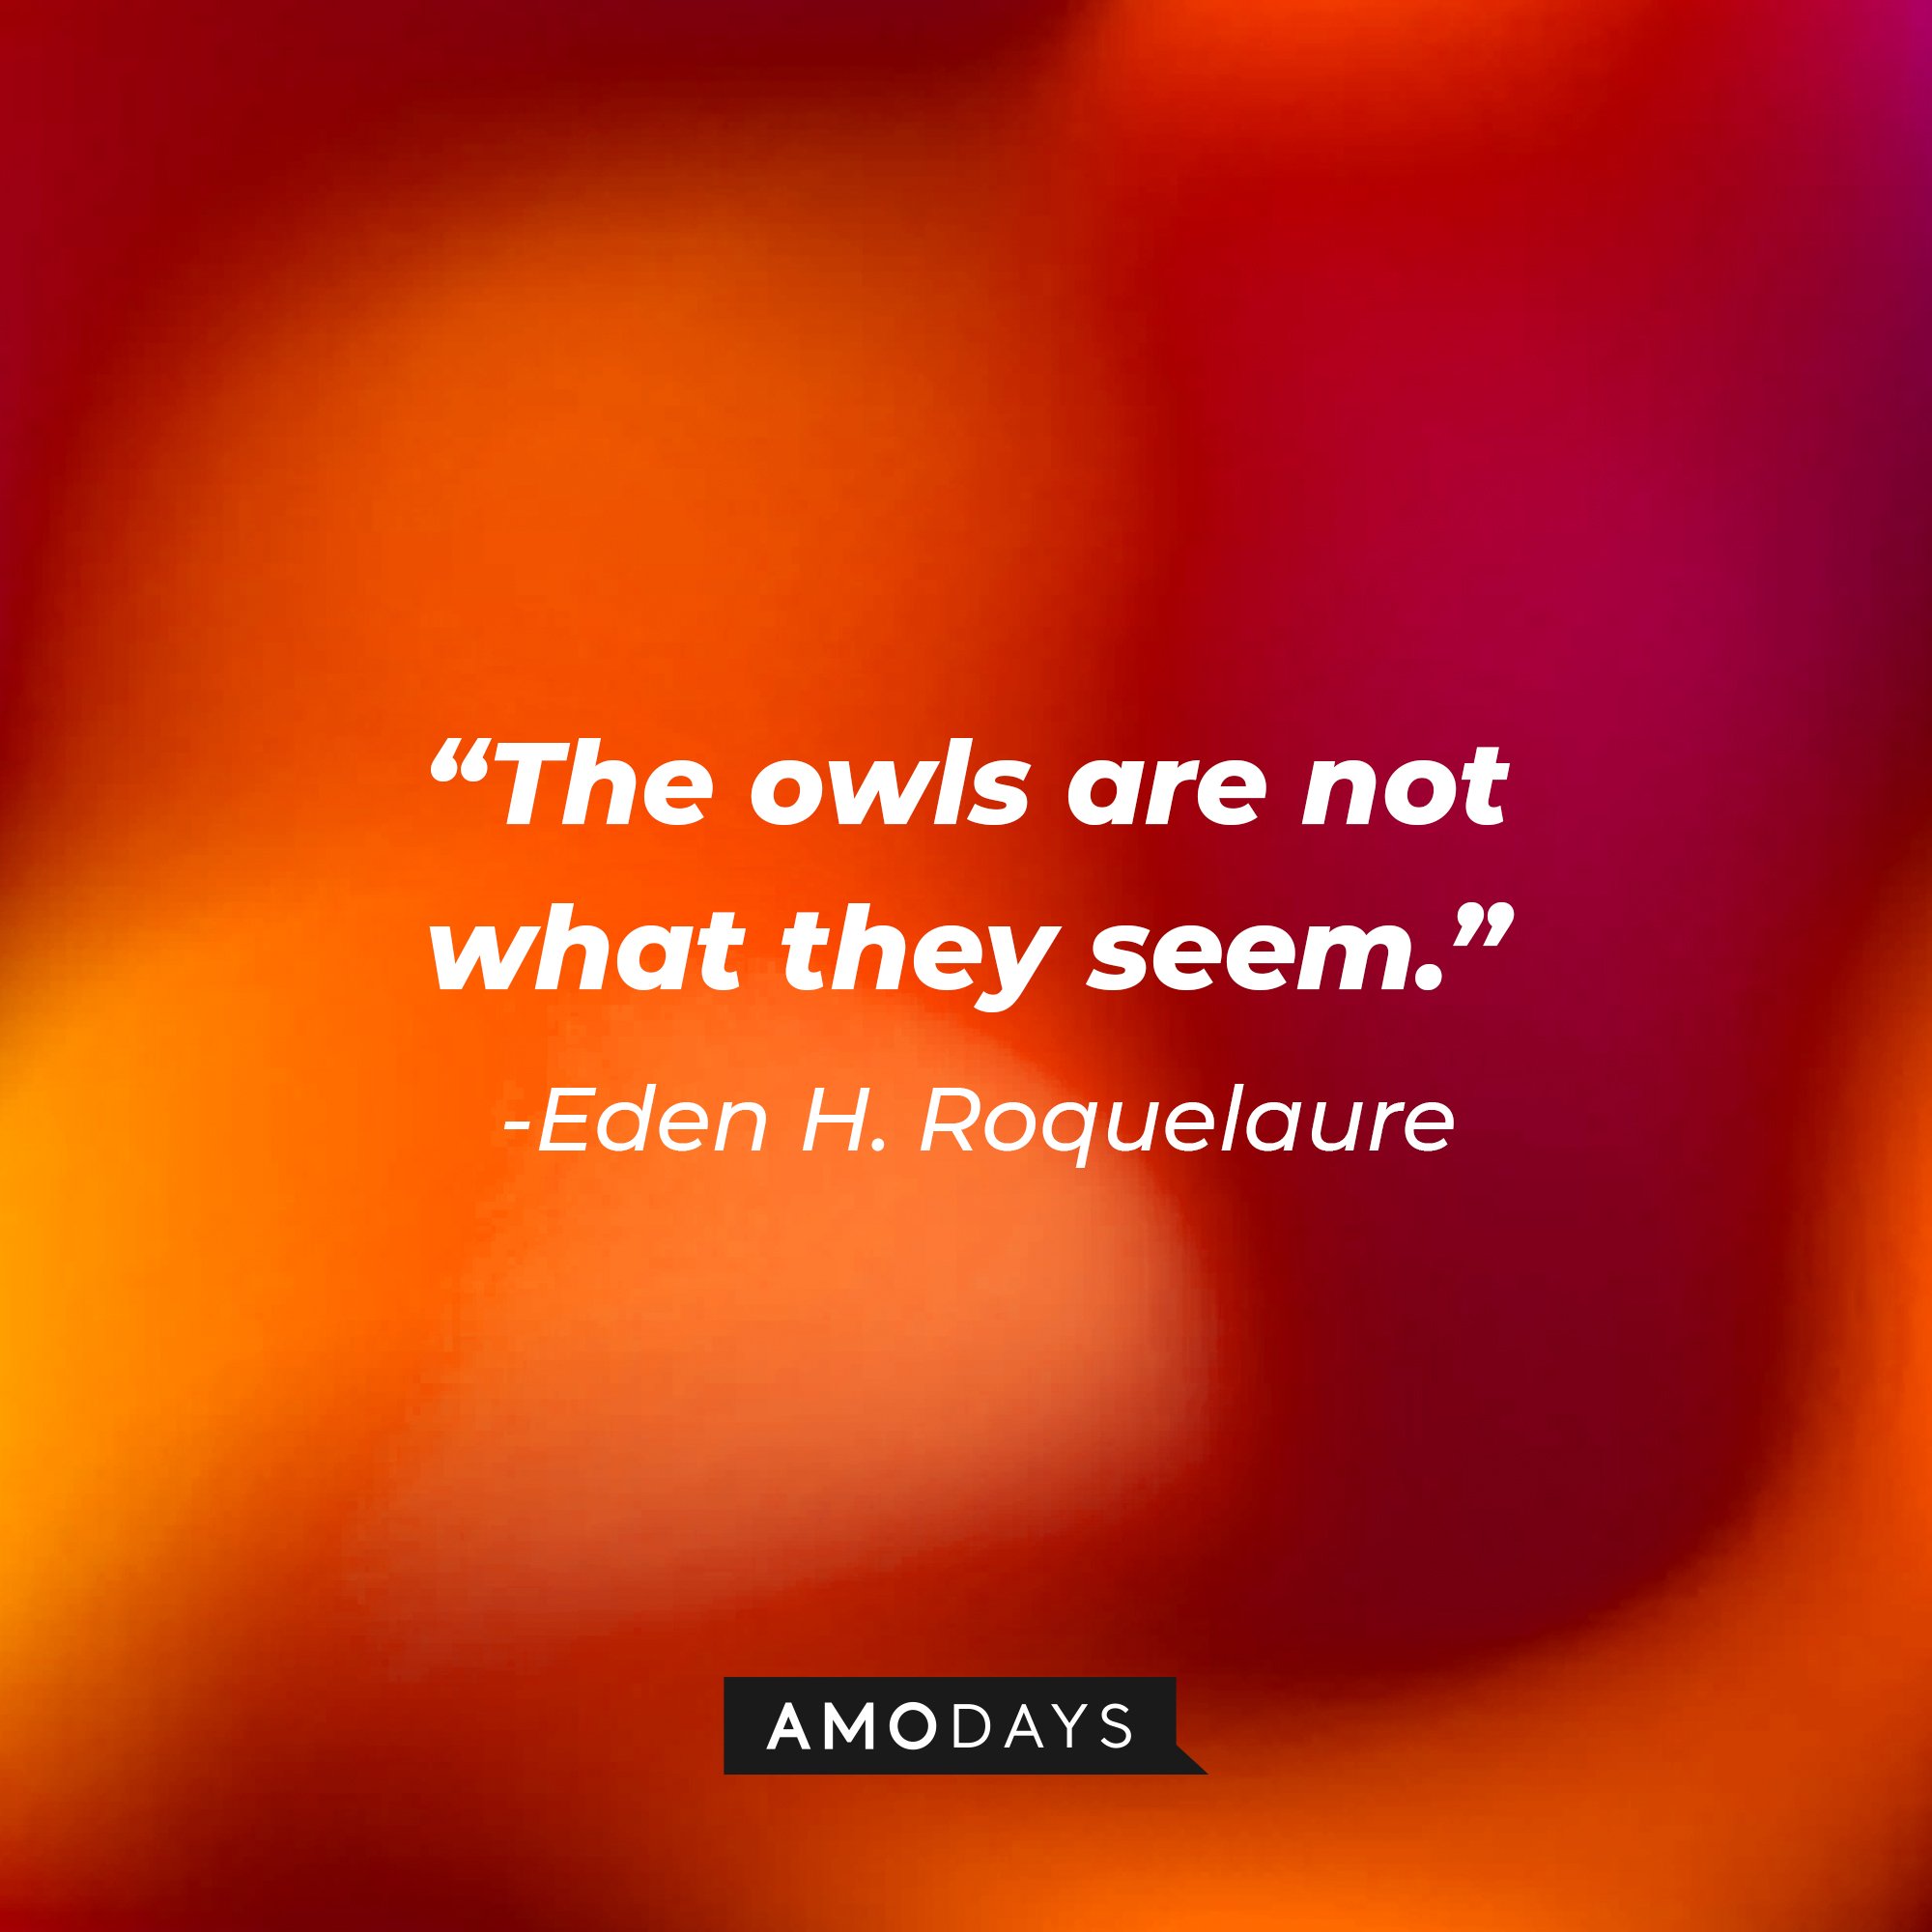 Eden H. Roquelaure’s quote: "The owls are not what they seem." | Image: AmoDays